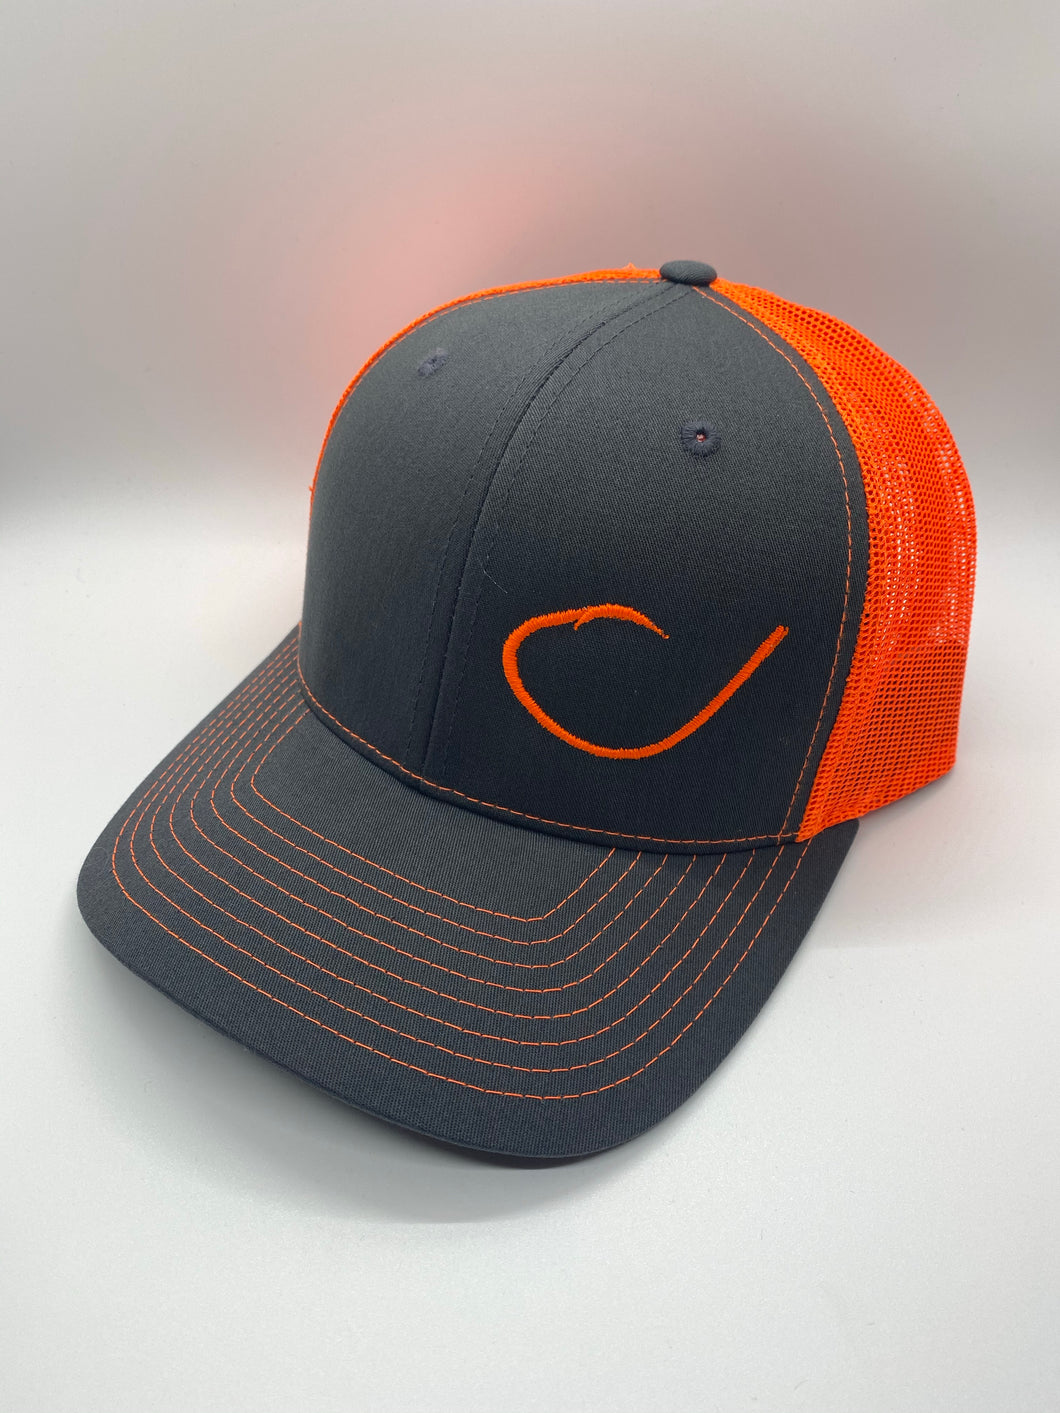 Charcoal and neon orange mesh trucker hat with a round fish hook on the front from Swamp Cracker Outdoor Apparel. 